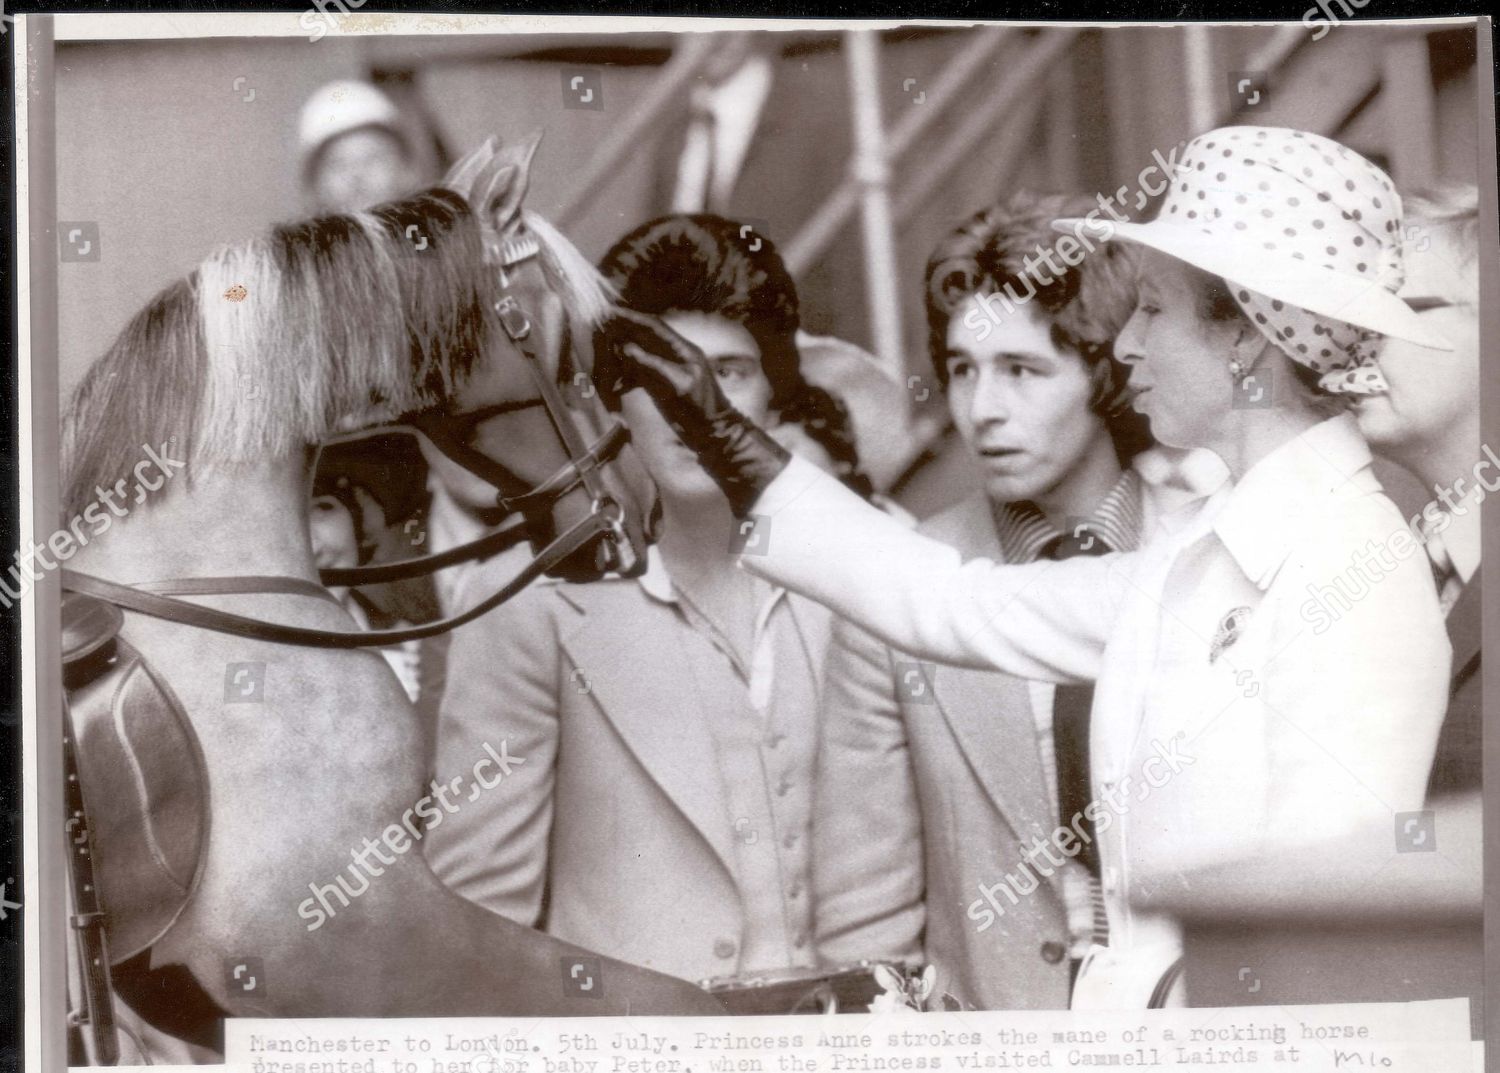 princess-anne-now-princess-royal-july-1978-princess-anne-welcomed-a-new-addition-to-the-royal-stables-yesterday-a-dapple-grey-rocking-horse-and-at-just-seven-months-old-baby-peter-looks-set-for-an-early-introduction-to-his-mothers-favourite-s-shutterstock-editorial-896342a.jpg